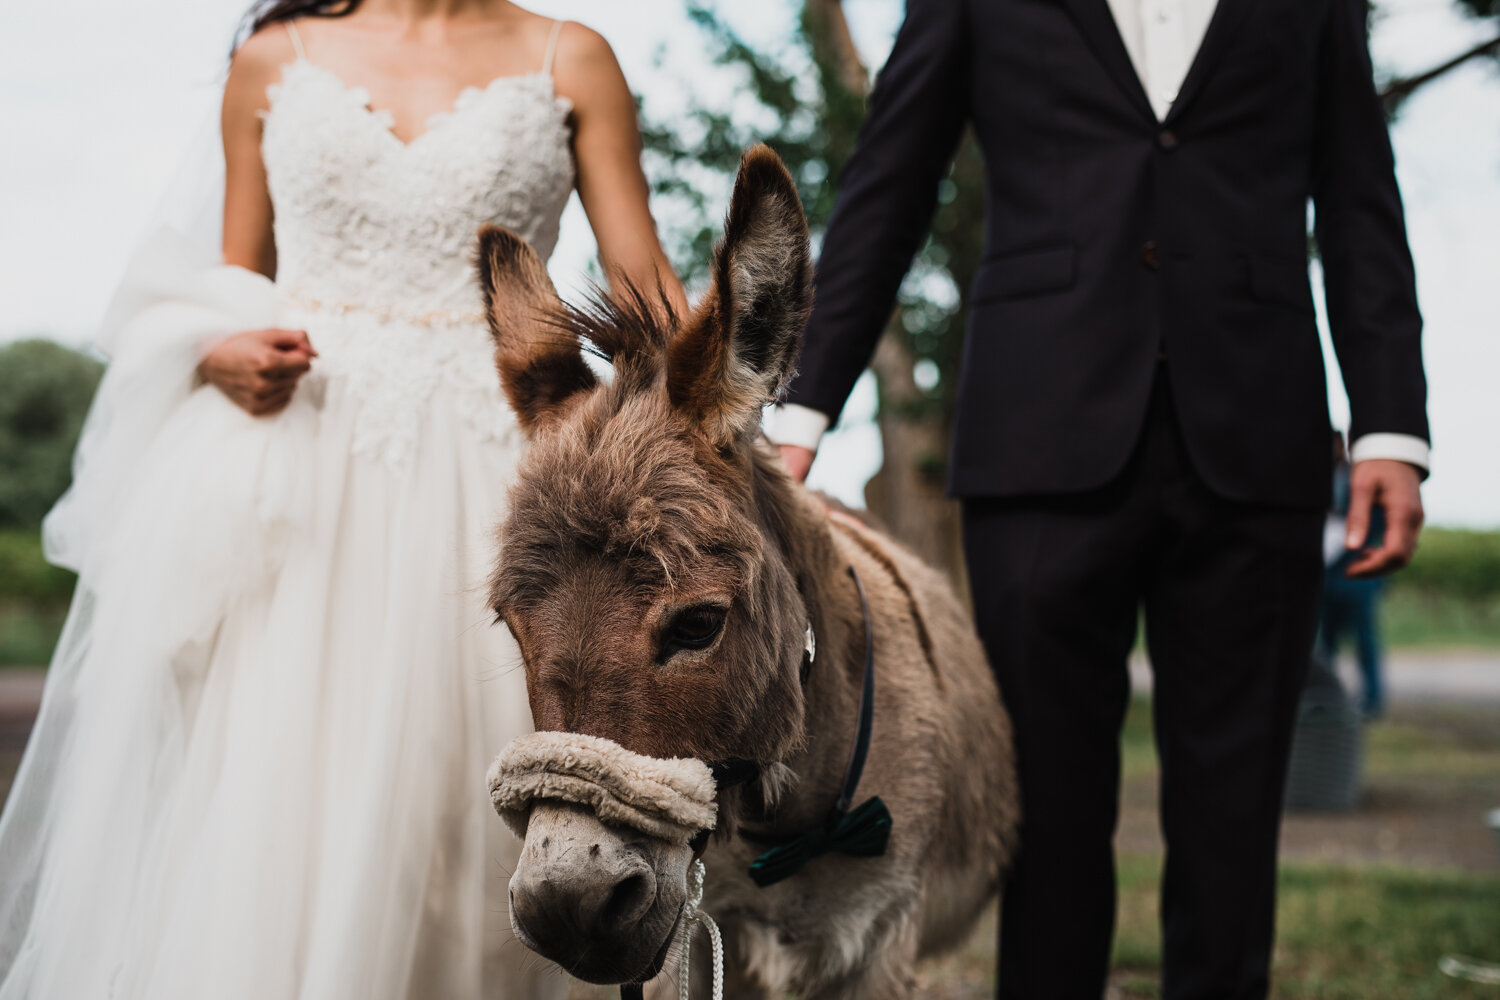 Bride and Groom with Donkey 033.jpg